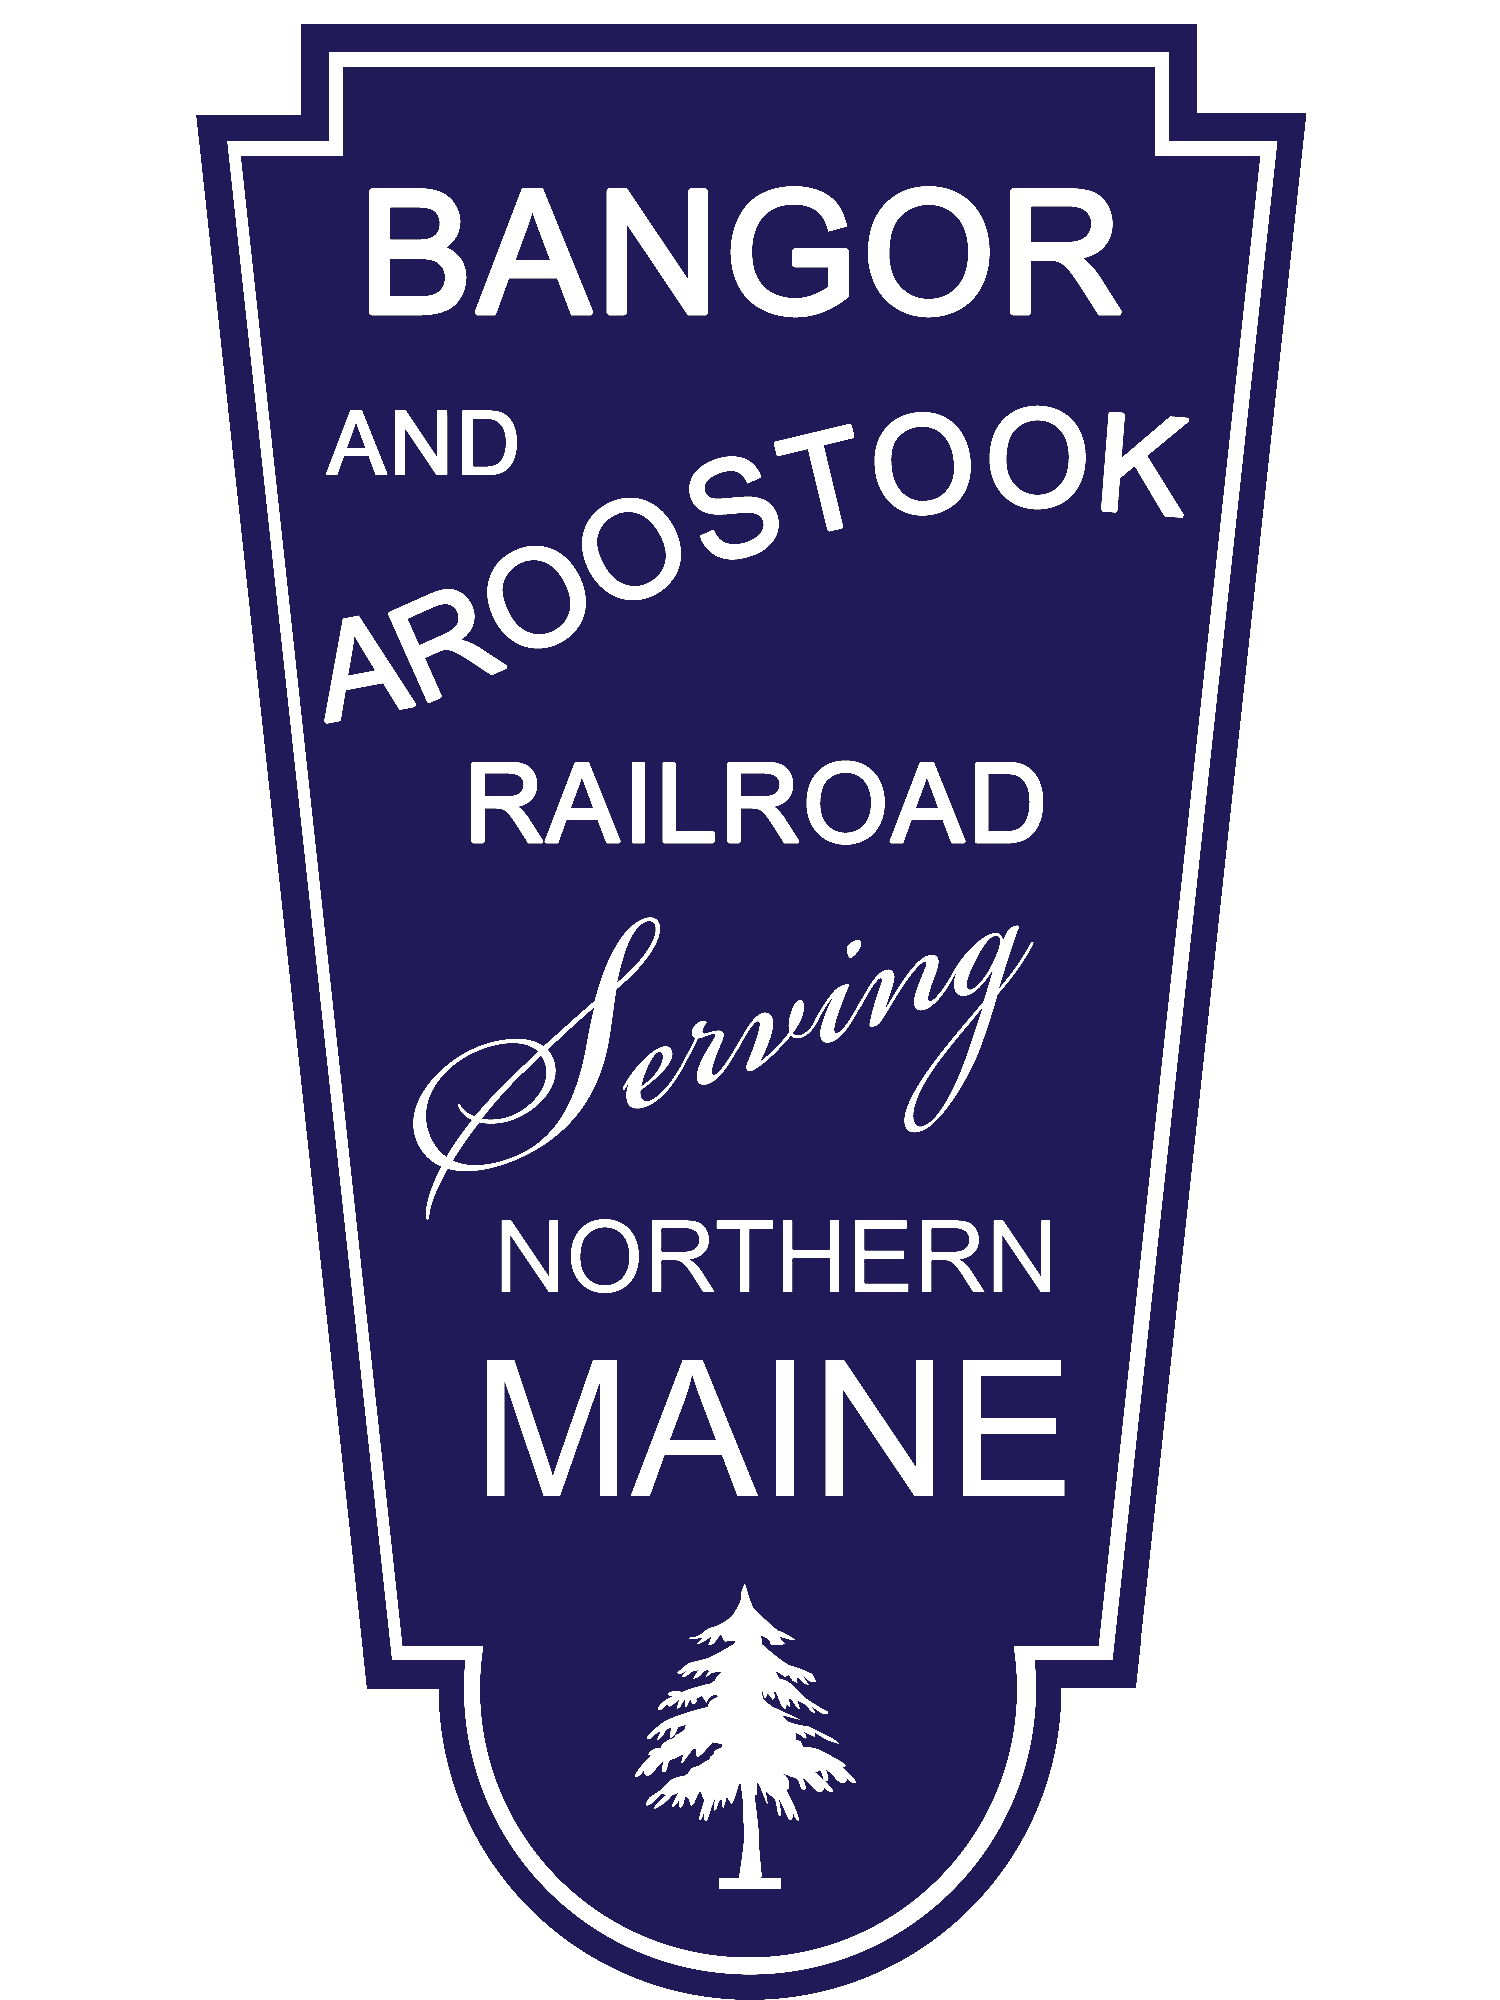 The BAR "Serving Northern Maine" shield; white lettering and
border on a blue shield